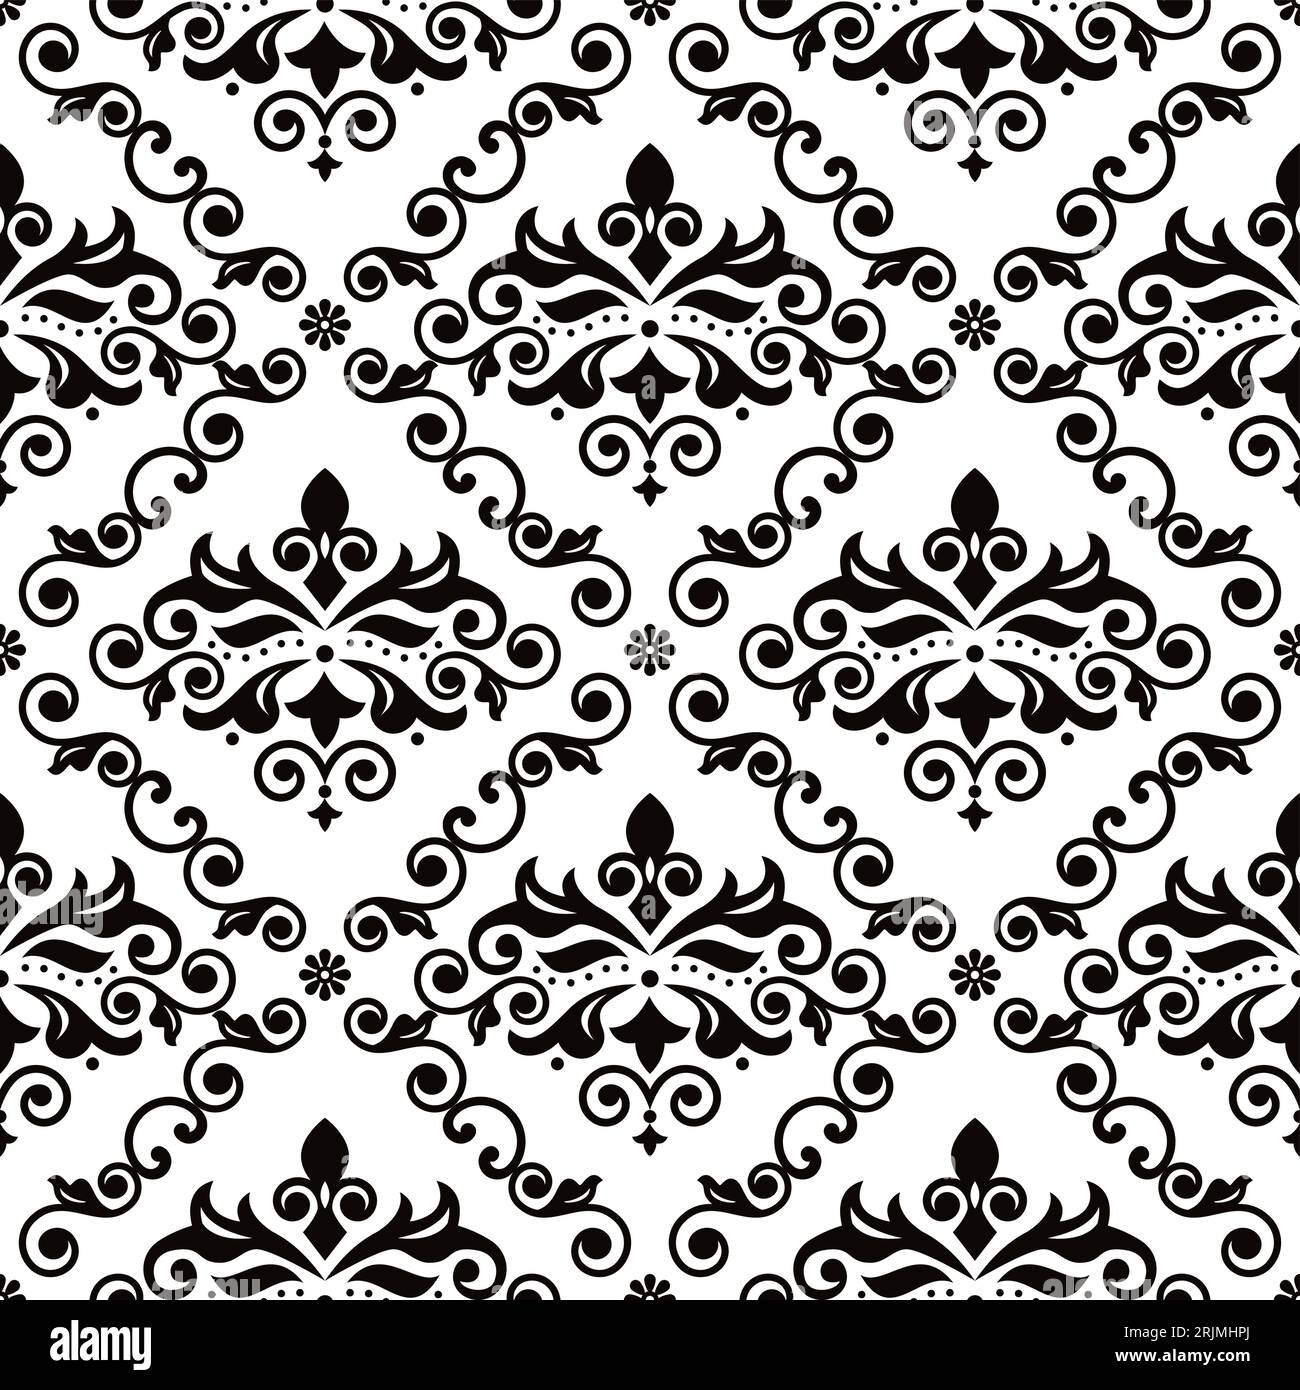 Luxury arabic Damask wallpaper or fabric print pattern, retro textile vector seamless design with flowers, leaves and swirls in black and white Stock Vector